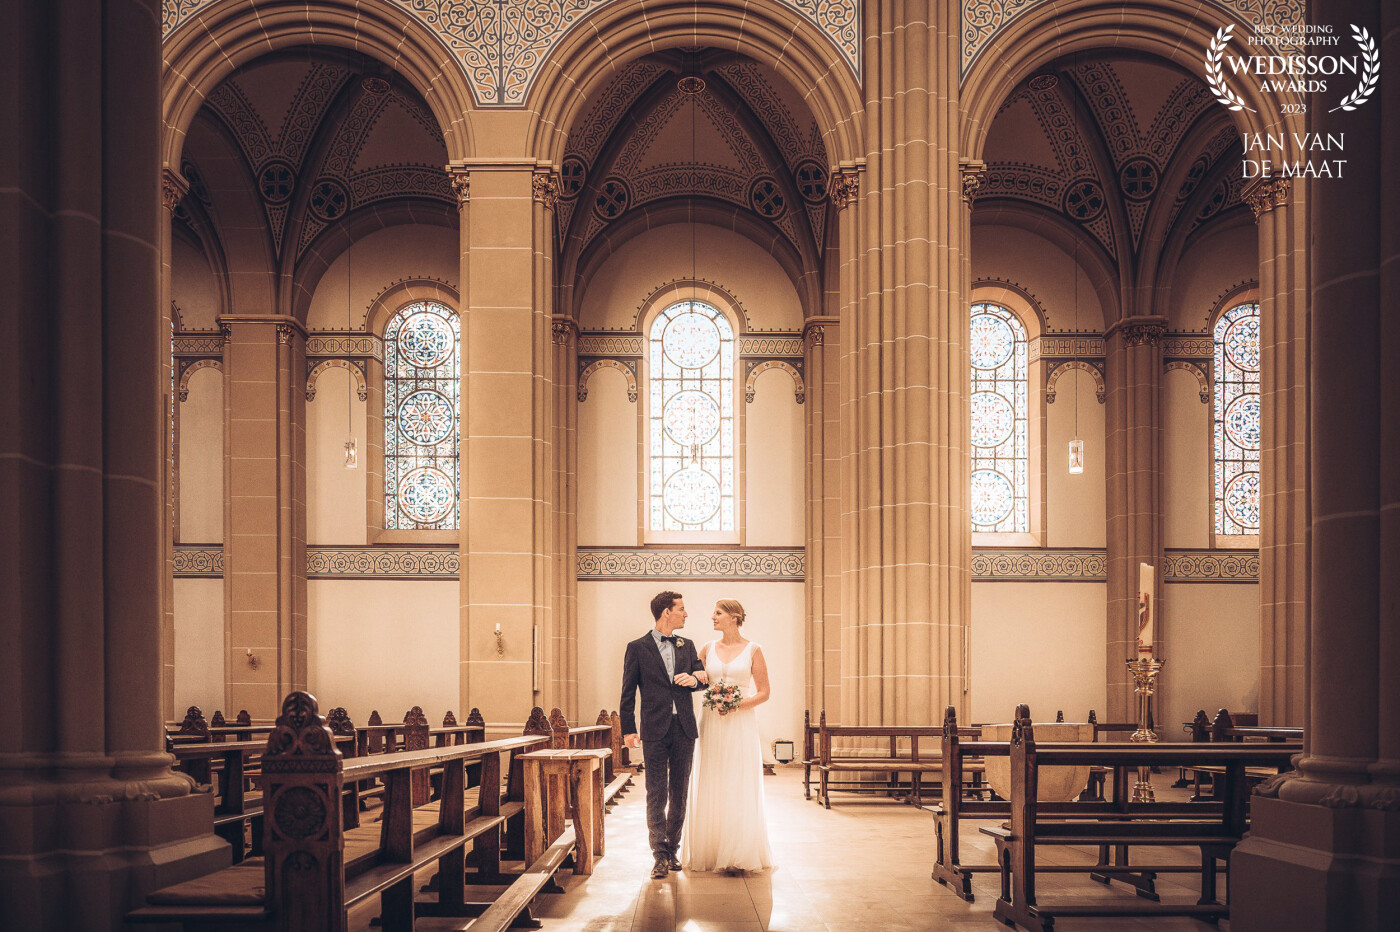 My couple wanted a few images inside the church but there were some people inside which we would not want to disturb. So I had to whisper and point directions to the couple and I was so very happy with my electronic shutter which made no sound!